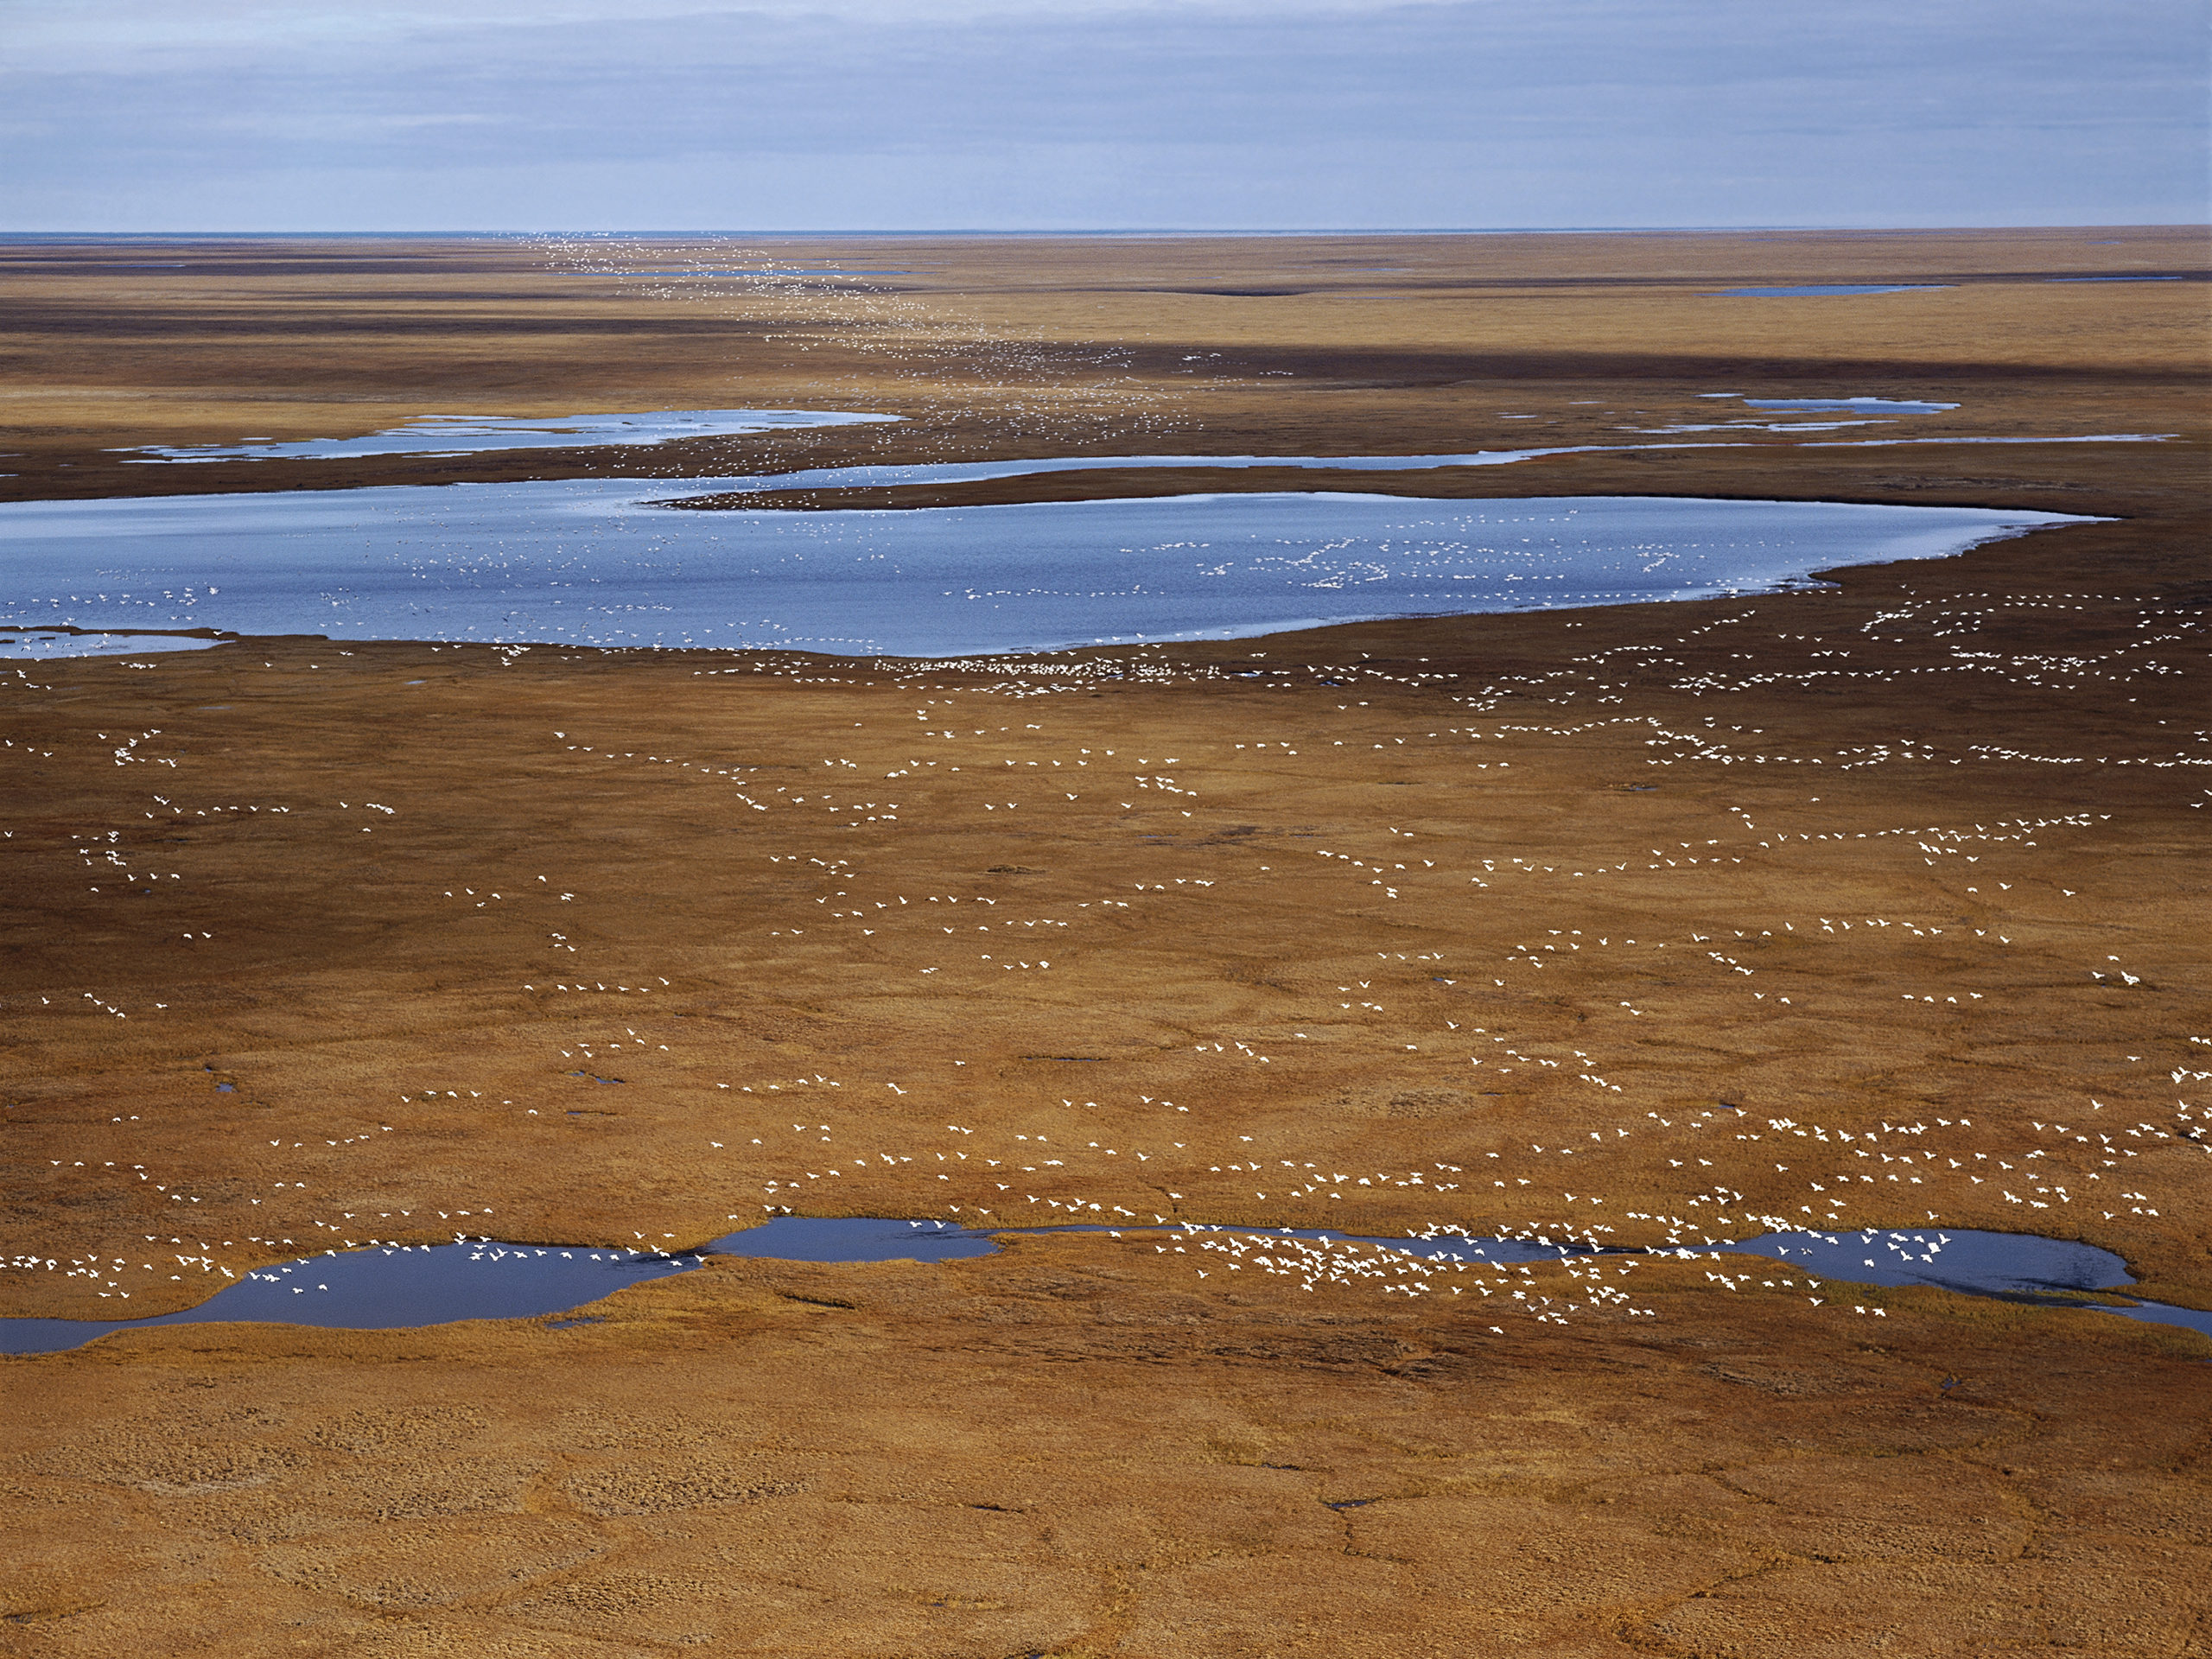 Fig_21.05_summer aerial image of snow geese over amber tundra and deep blue water